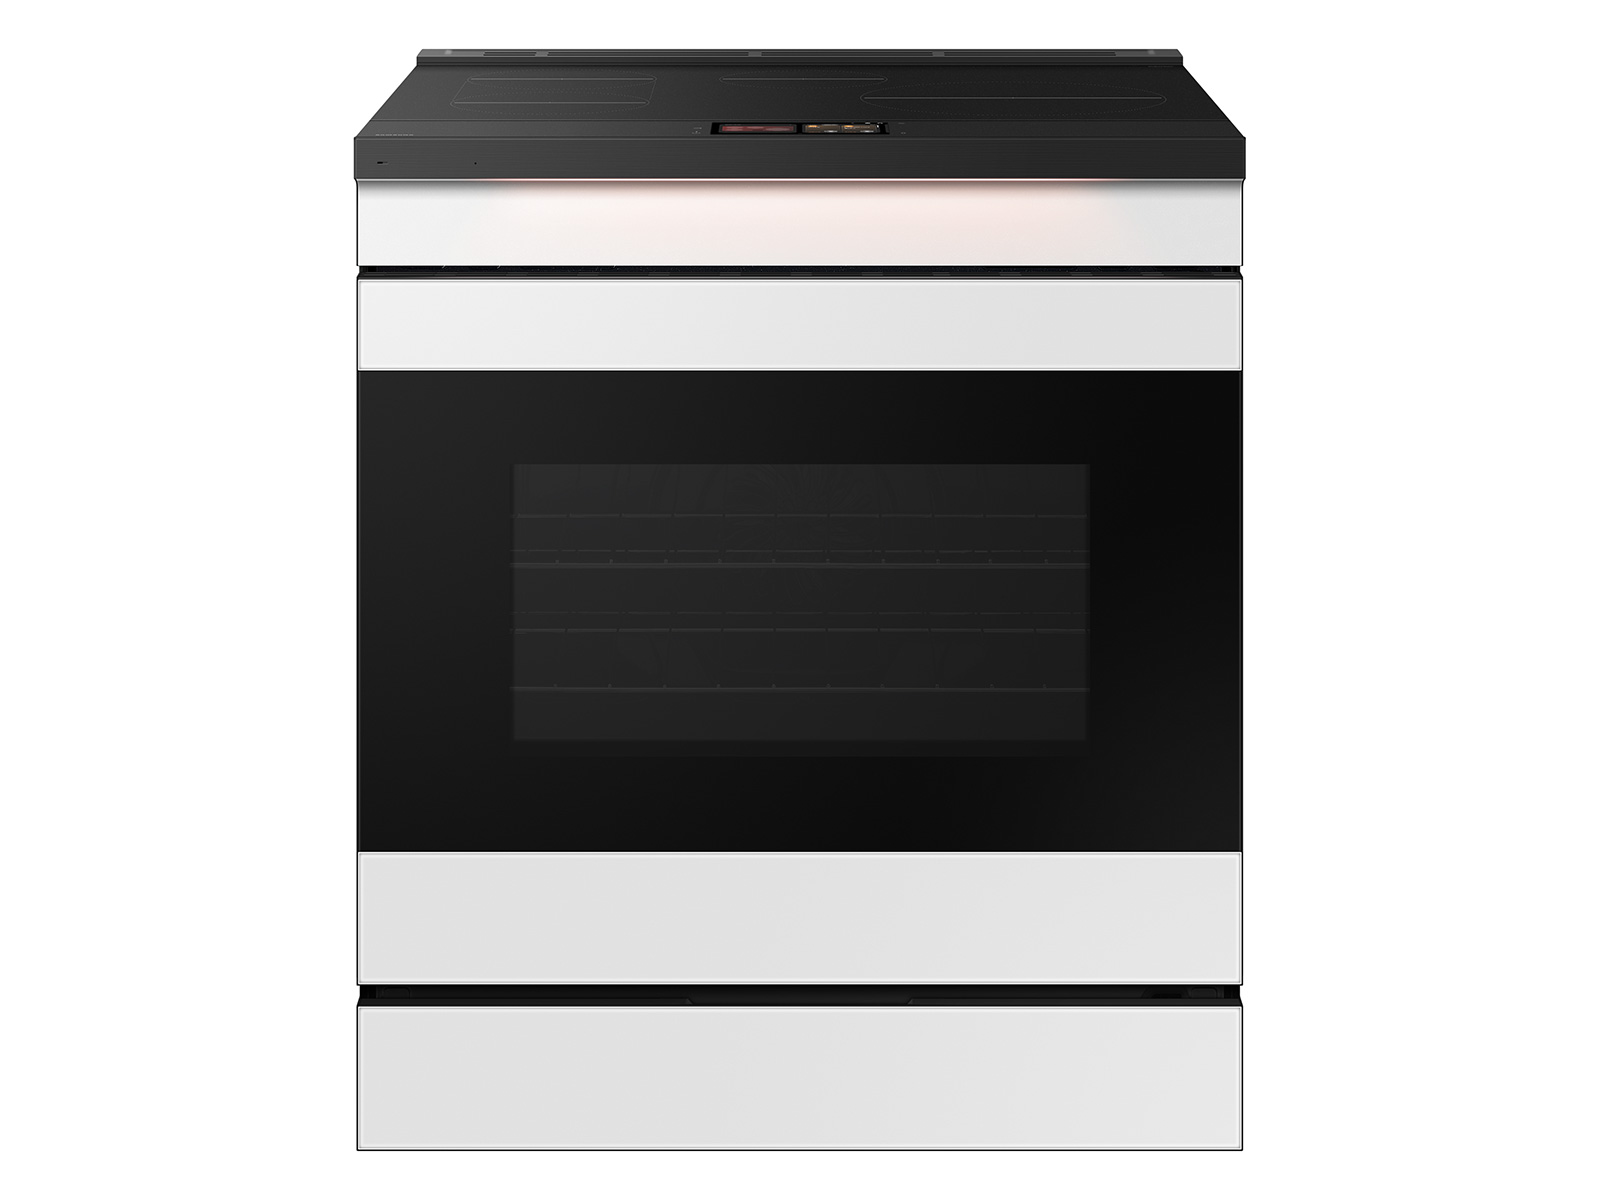 Bespoke Smart Slide-In Induction Range with AI Home & Smart Oven Camera